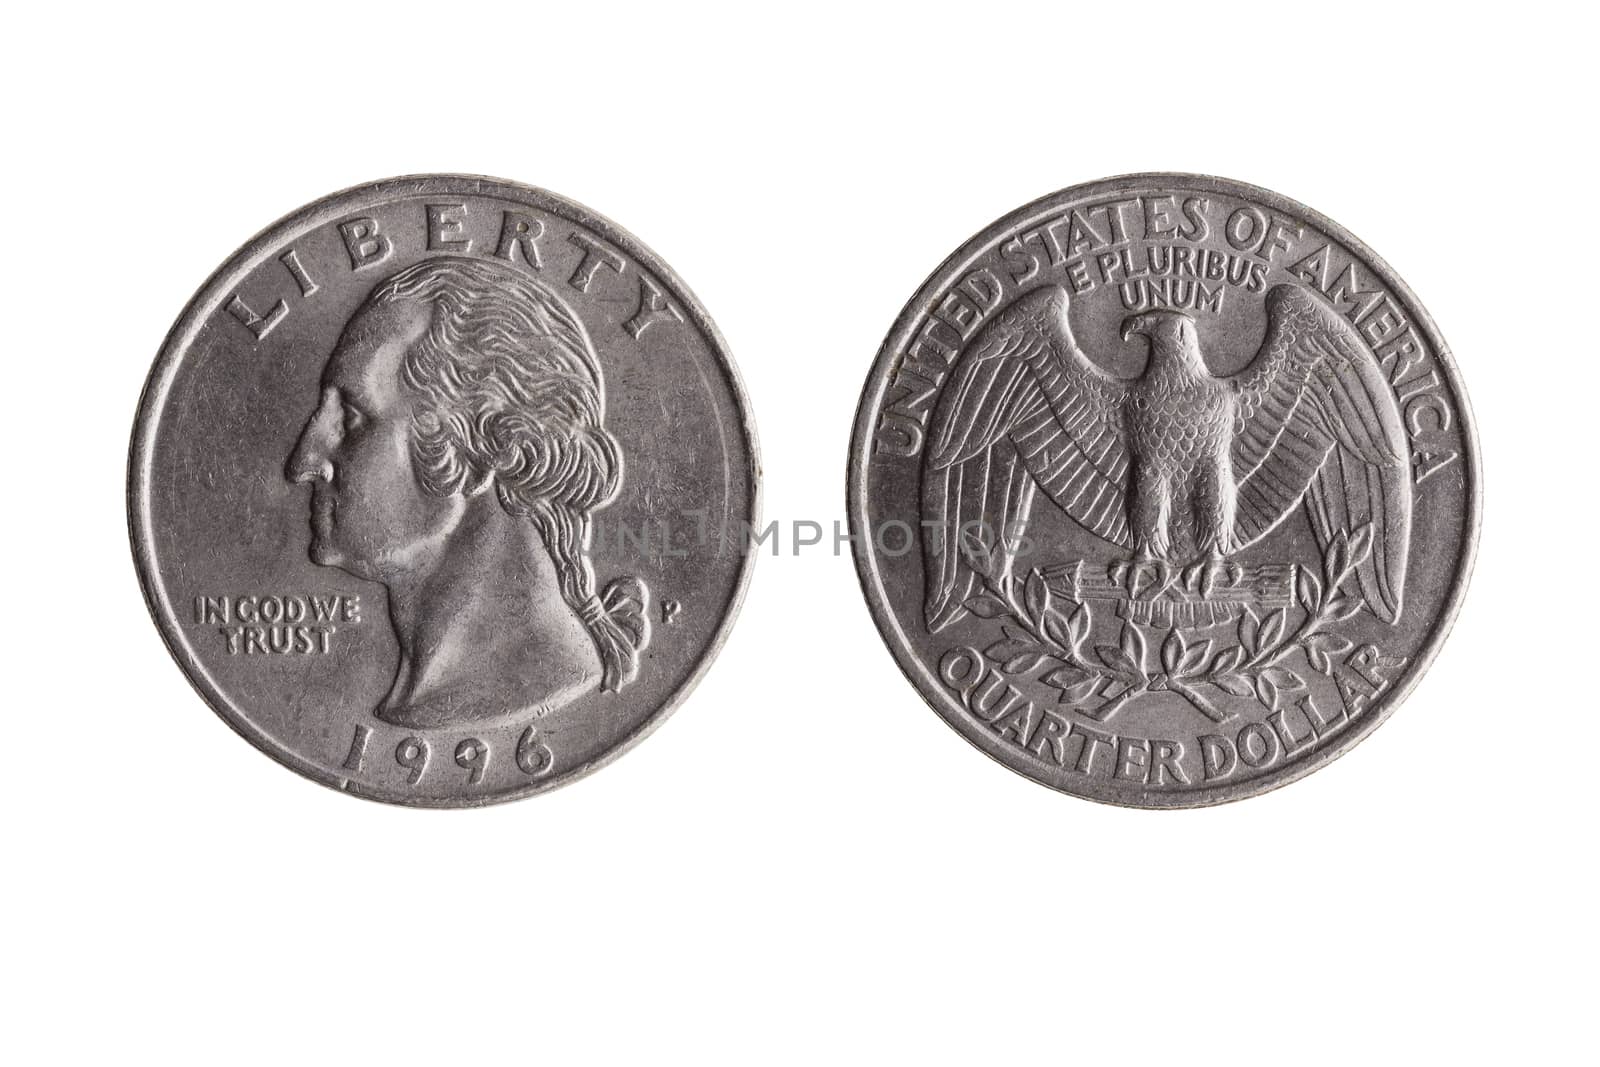 USA quarter dollar nickel coin (25 cents) with a portrait image  by ant